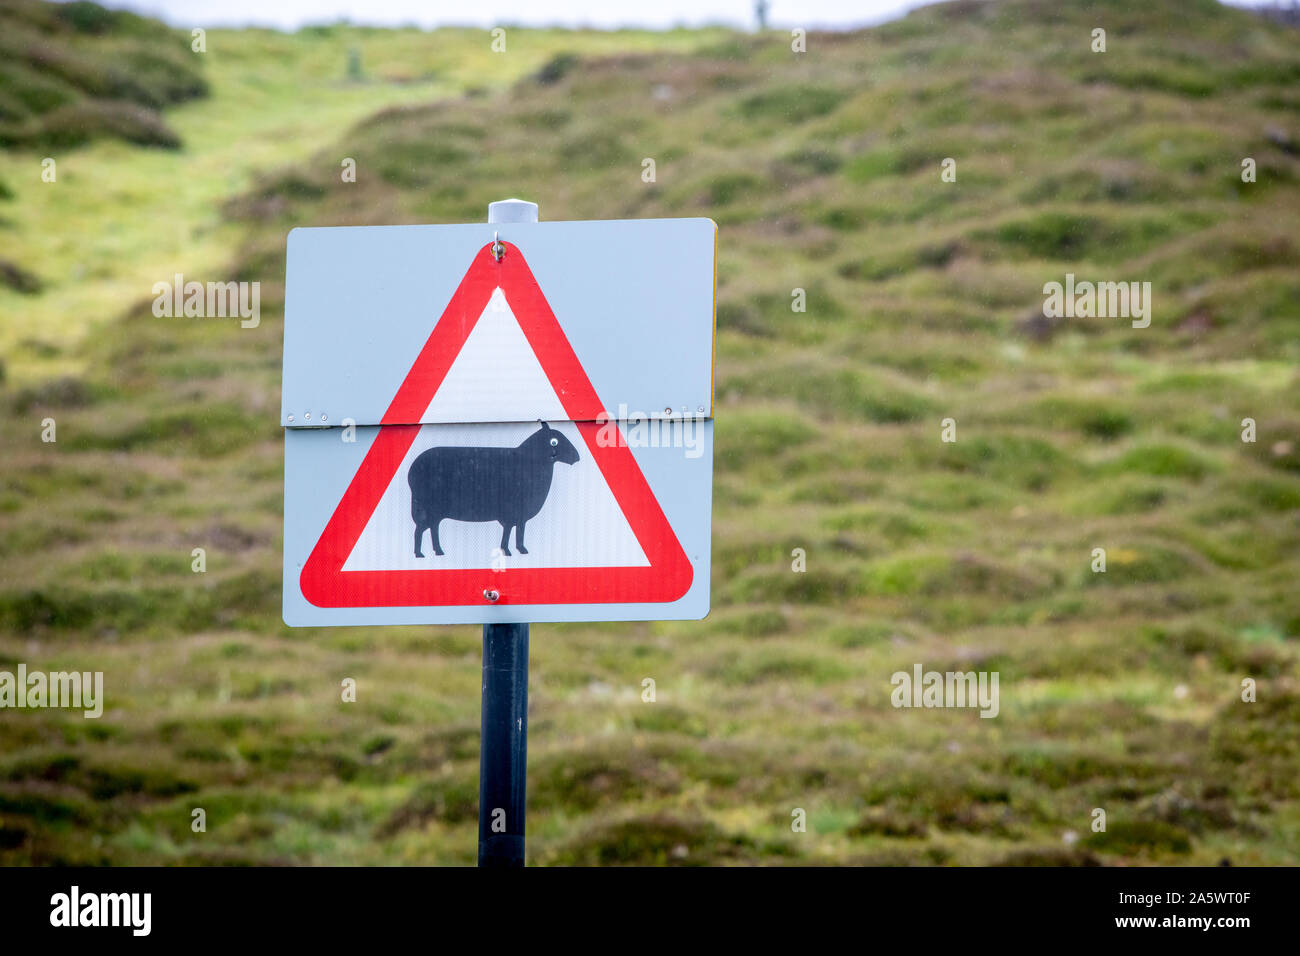 A warning sign alerting people to sheep roaming the areas, Hawes, Yorkshire, UK Stock Photo